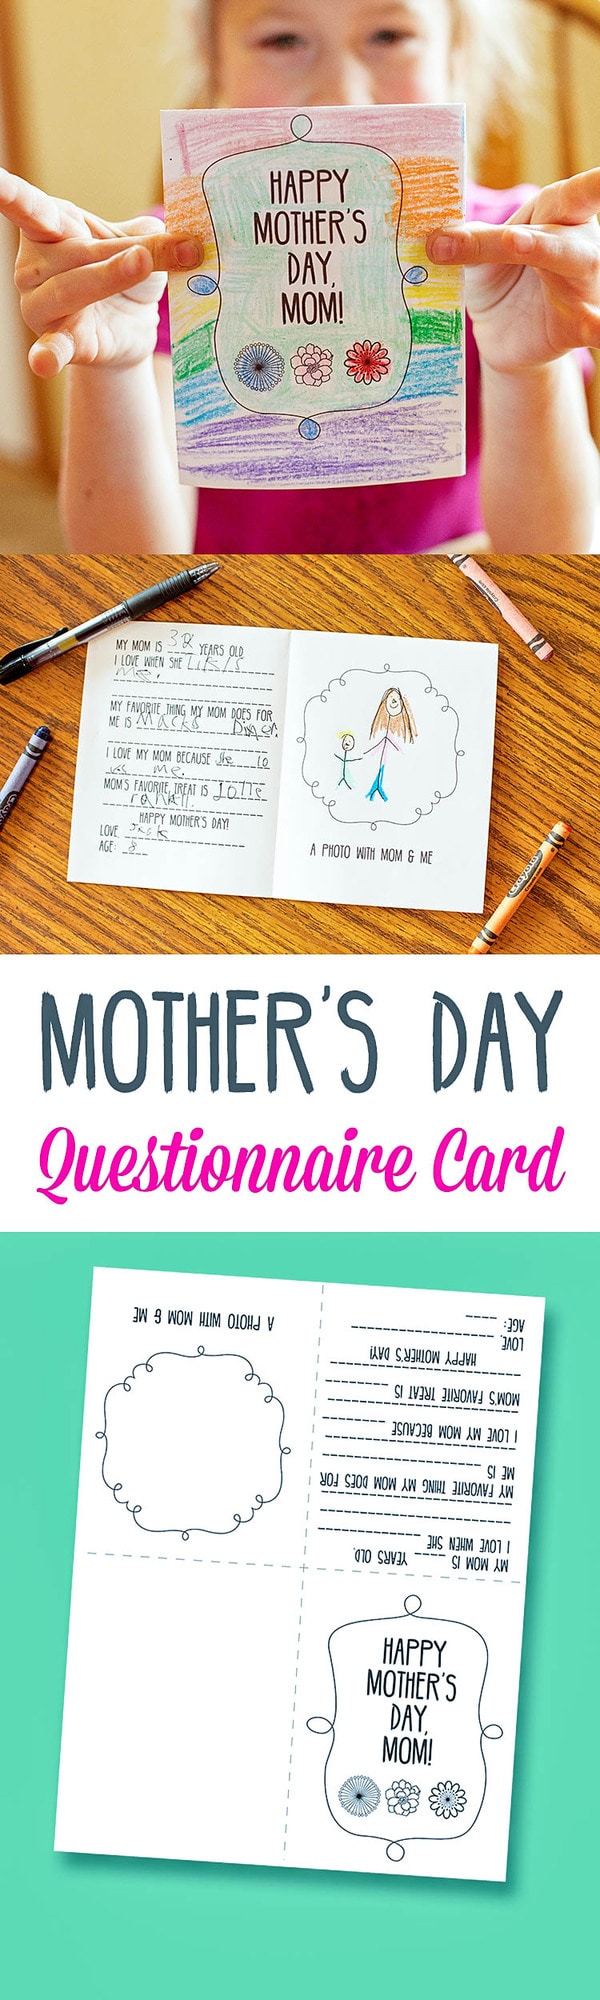 Mother's Day Questionnaire Fill-In Card Printable - cute idea for the kids to make on Mother's Day!